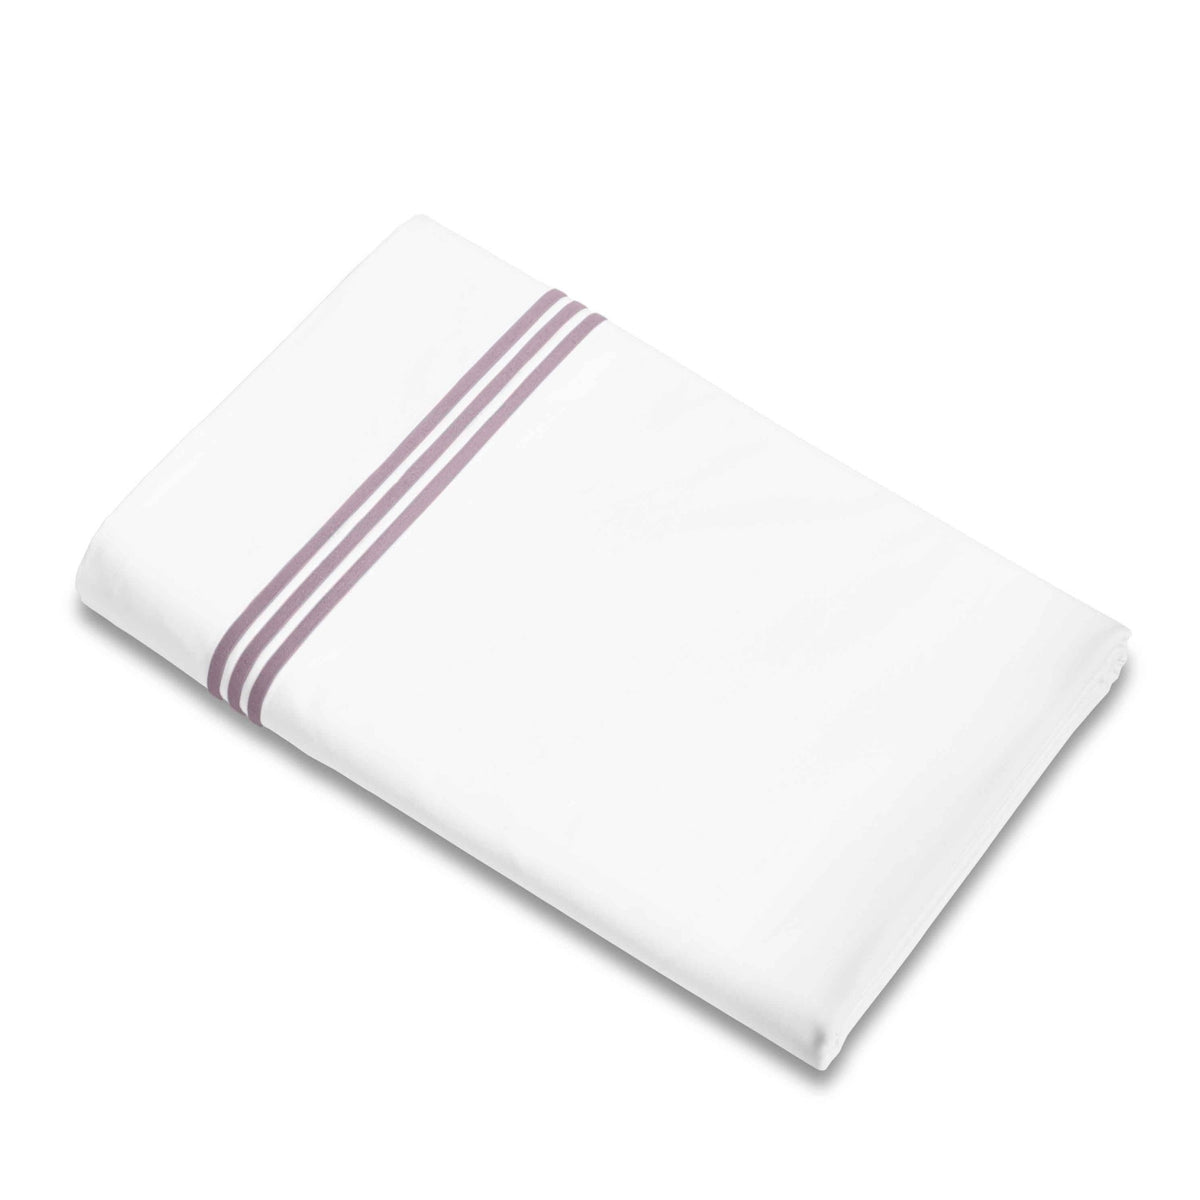 Flat Sheet of Signoria Platinum Percale Bedding in White/Thistle Color